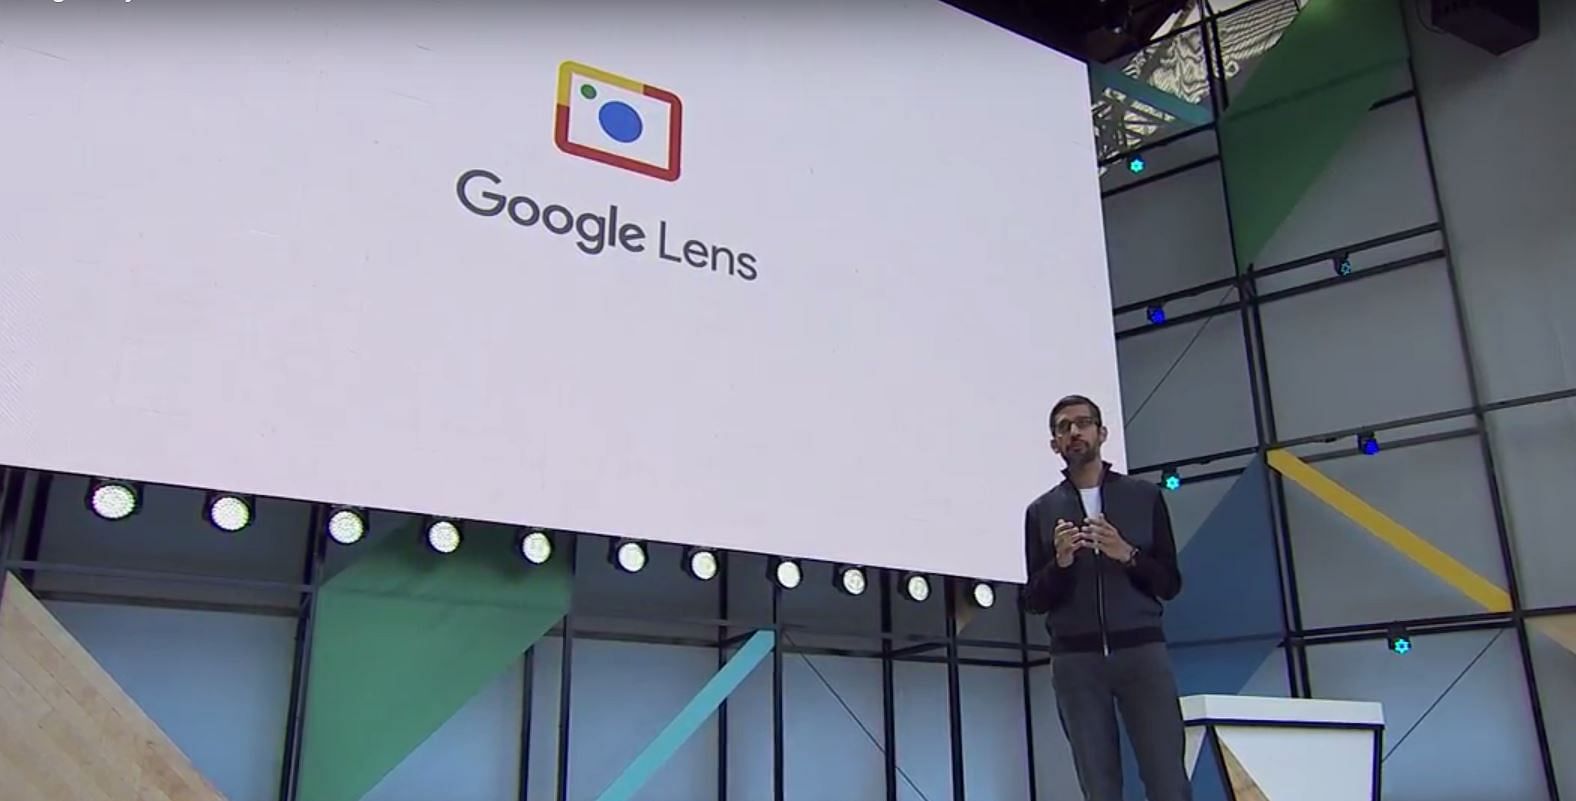 <div class="paragraphs"><p>How to search images using Google Lens on Chrome</p></div>